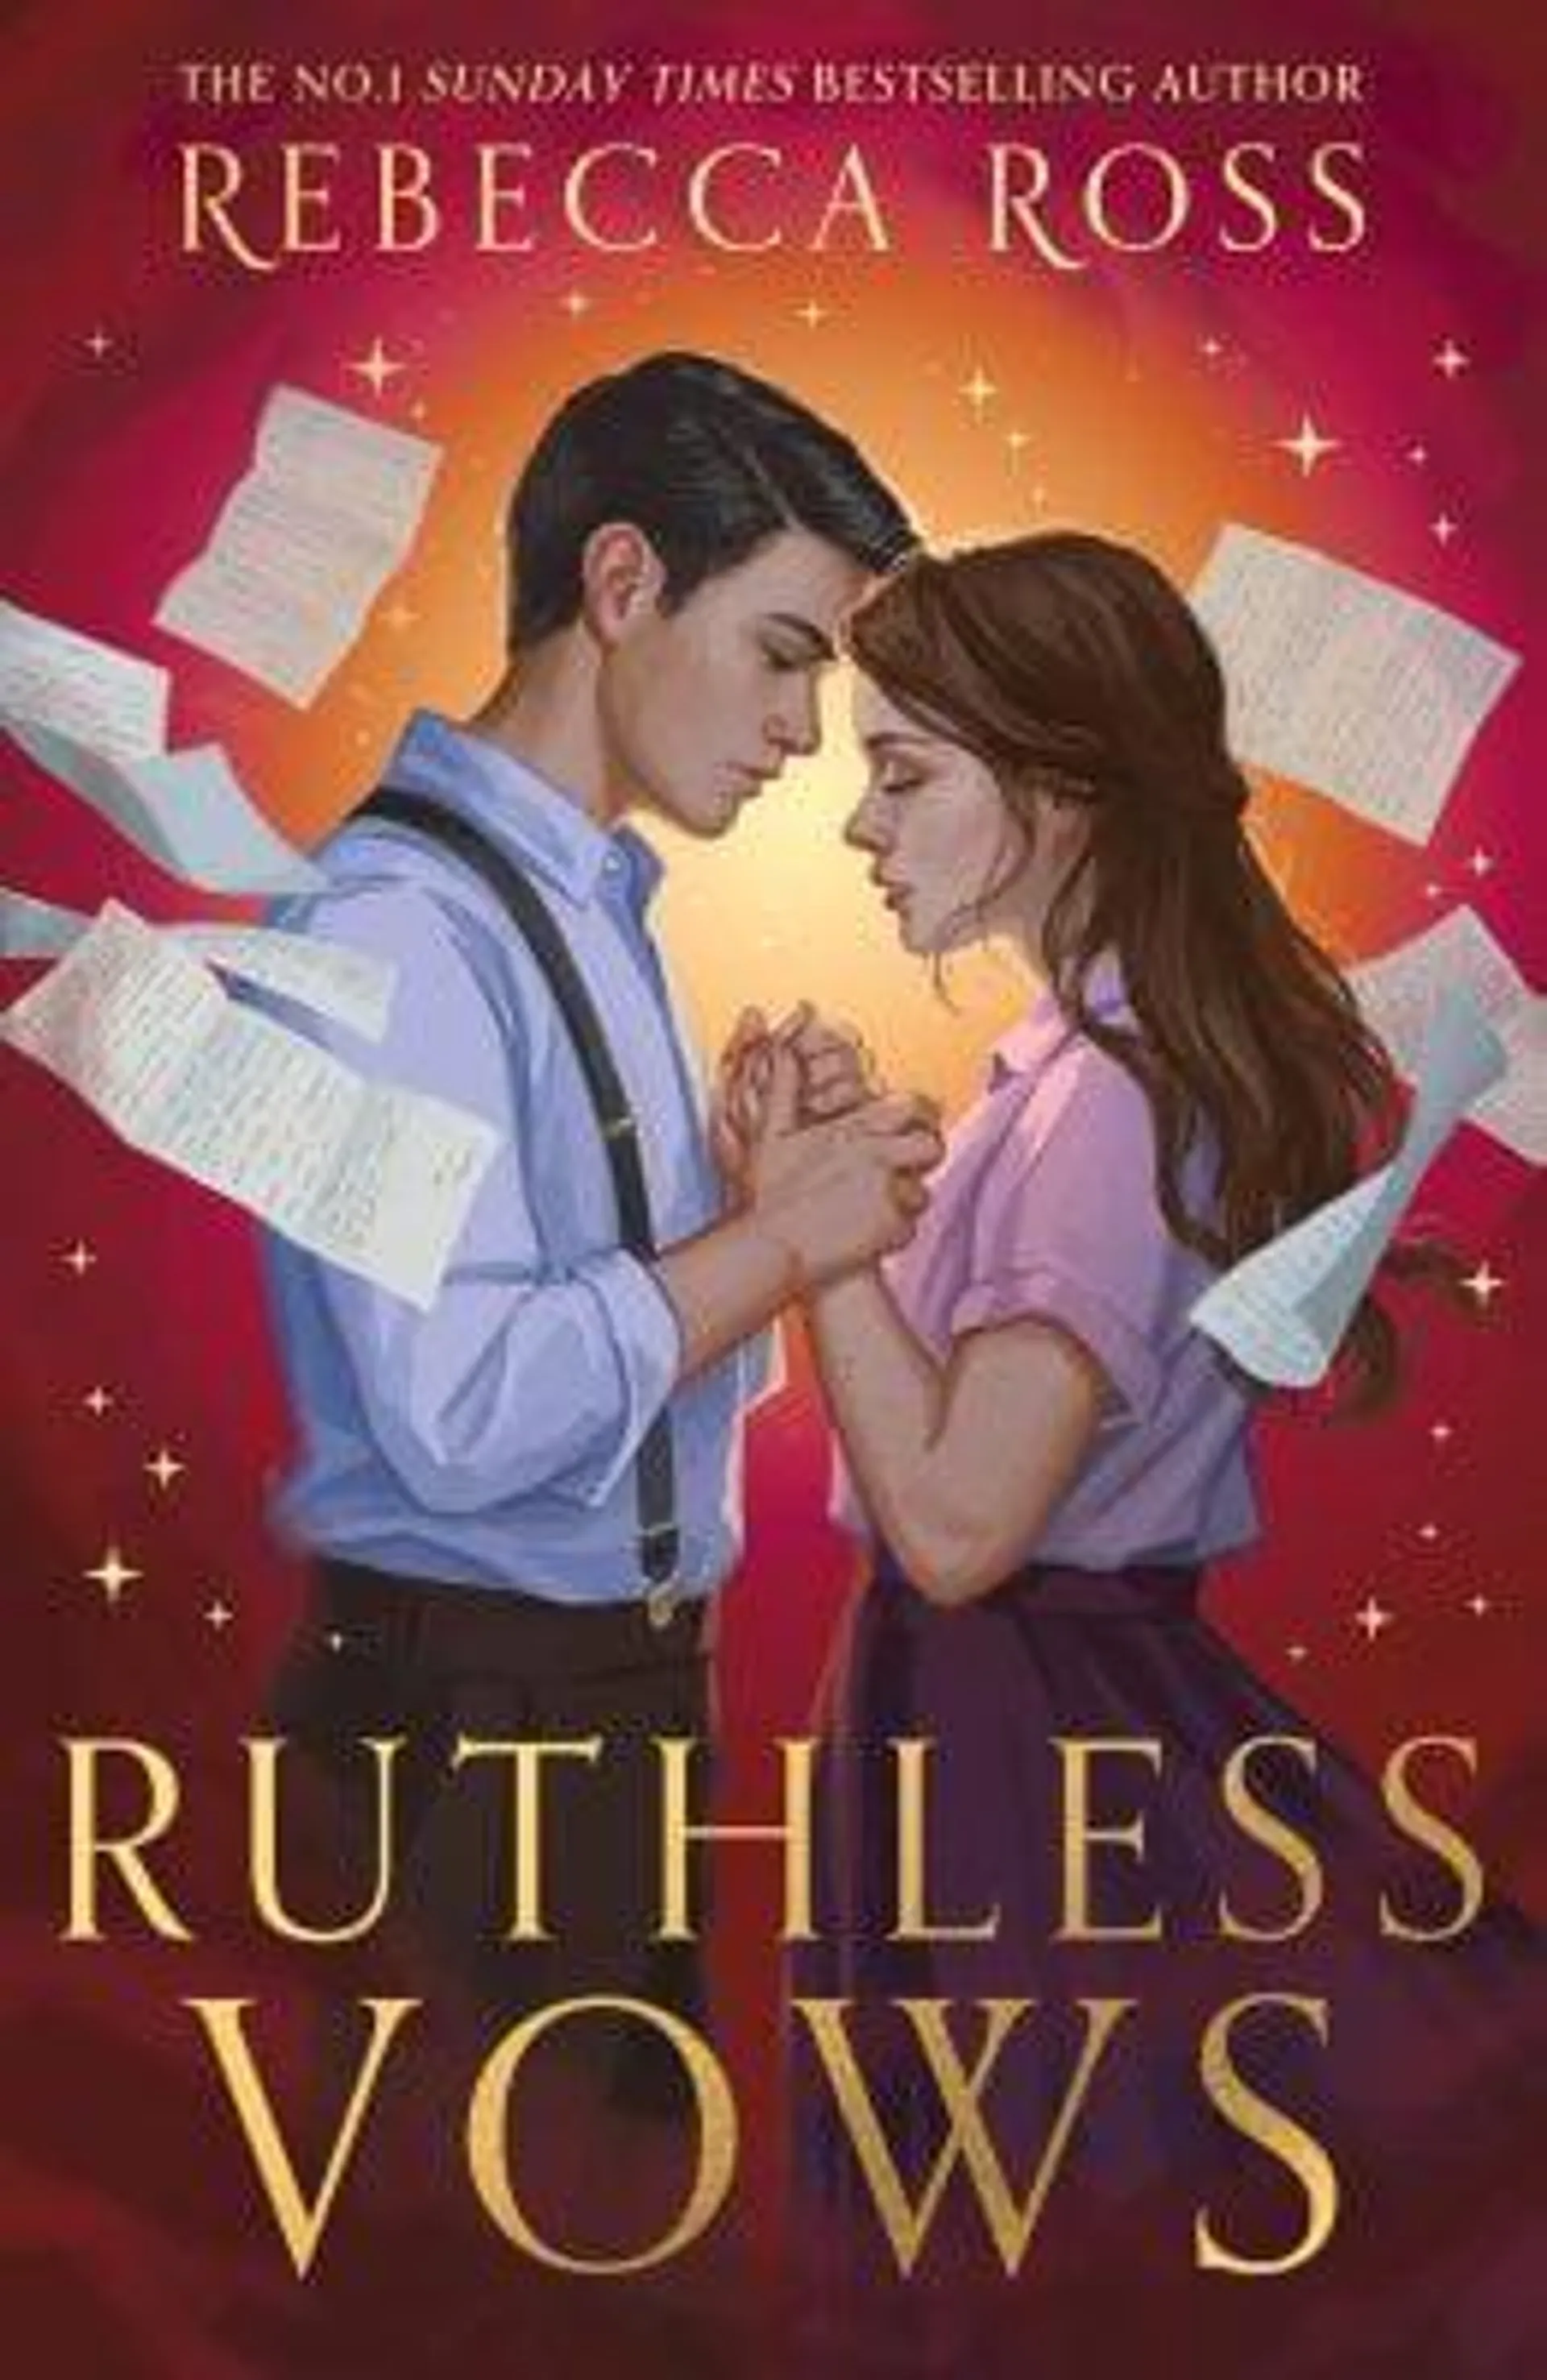 Ruthless Vows - Letters of Enchantment Book 2 (Hardback)